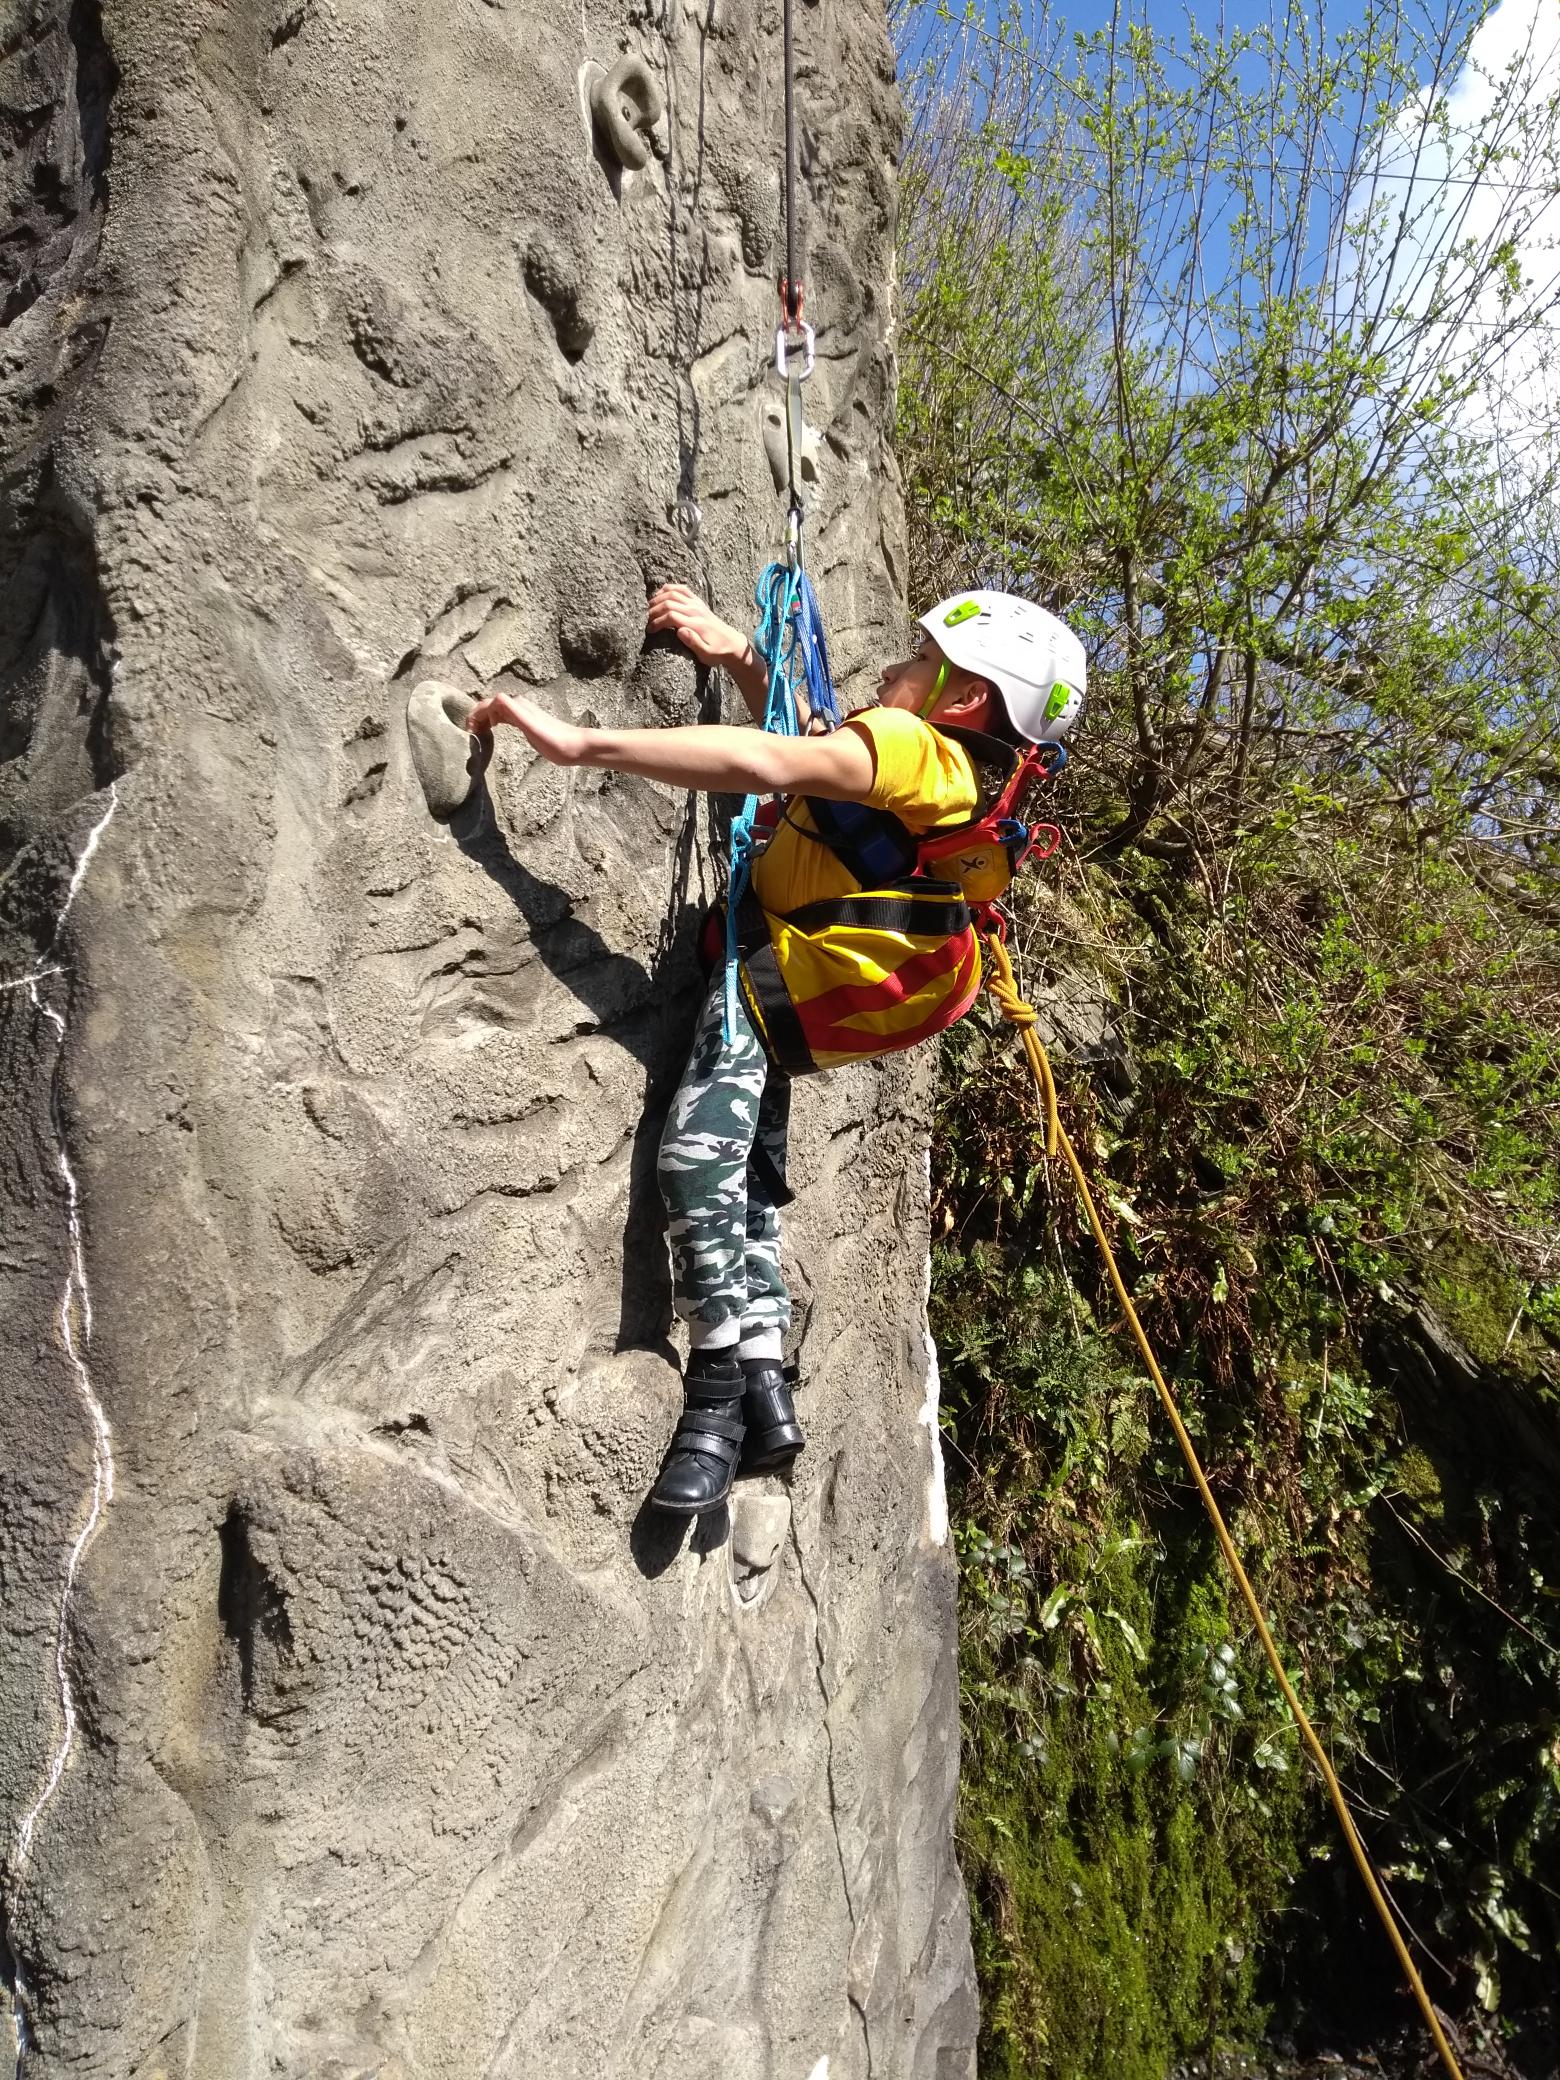 A guest wearing a white helmet and a yellow sling harness is suspended in front of an outdoor climbing wall. Their hands are holding some climbing holds and their legs are hanging below them.